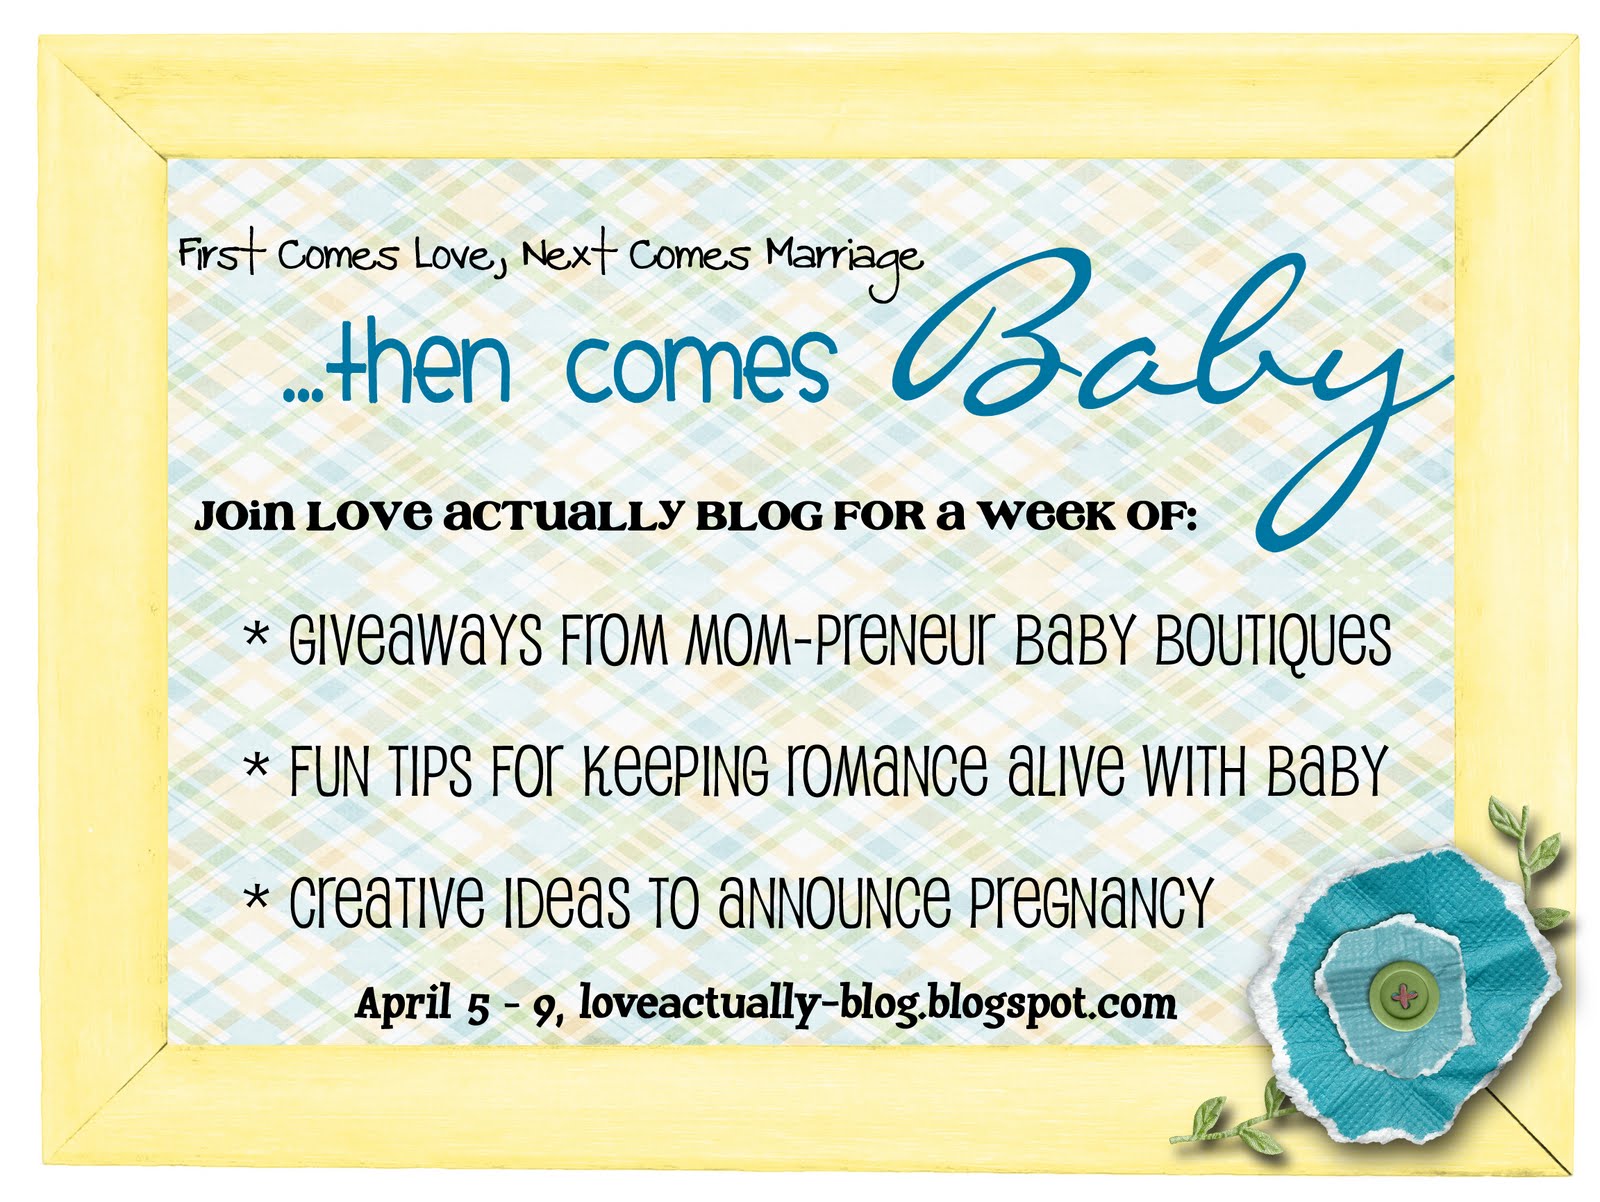 Love join. Baby one week elements.